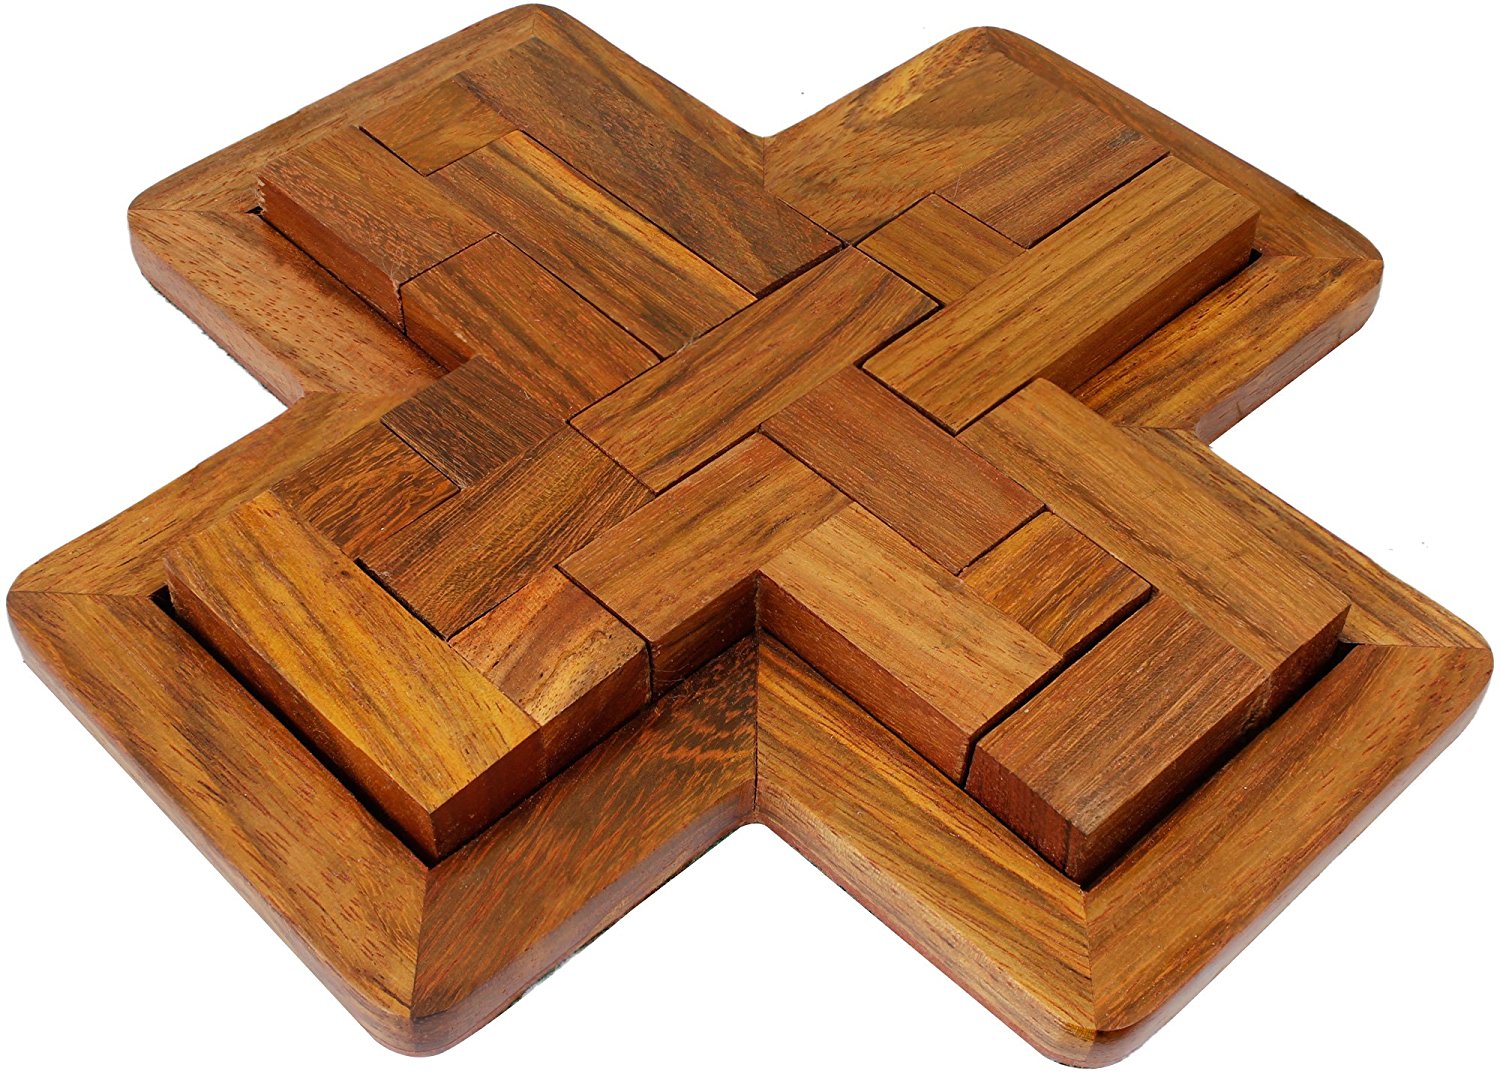 Wooden Toy Jigsaw Puzzle